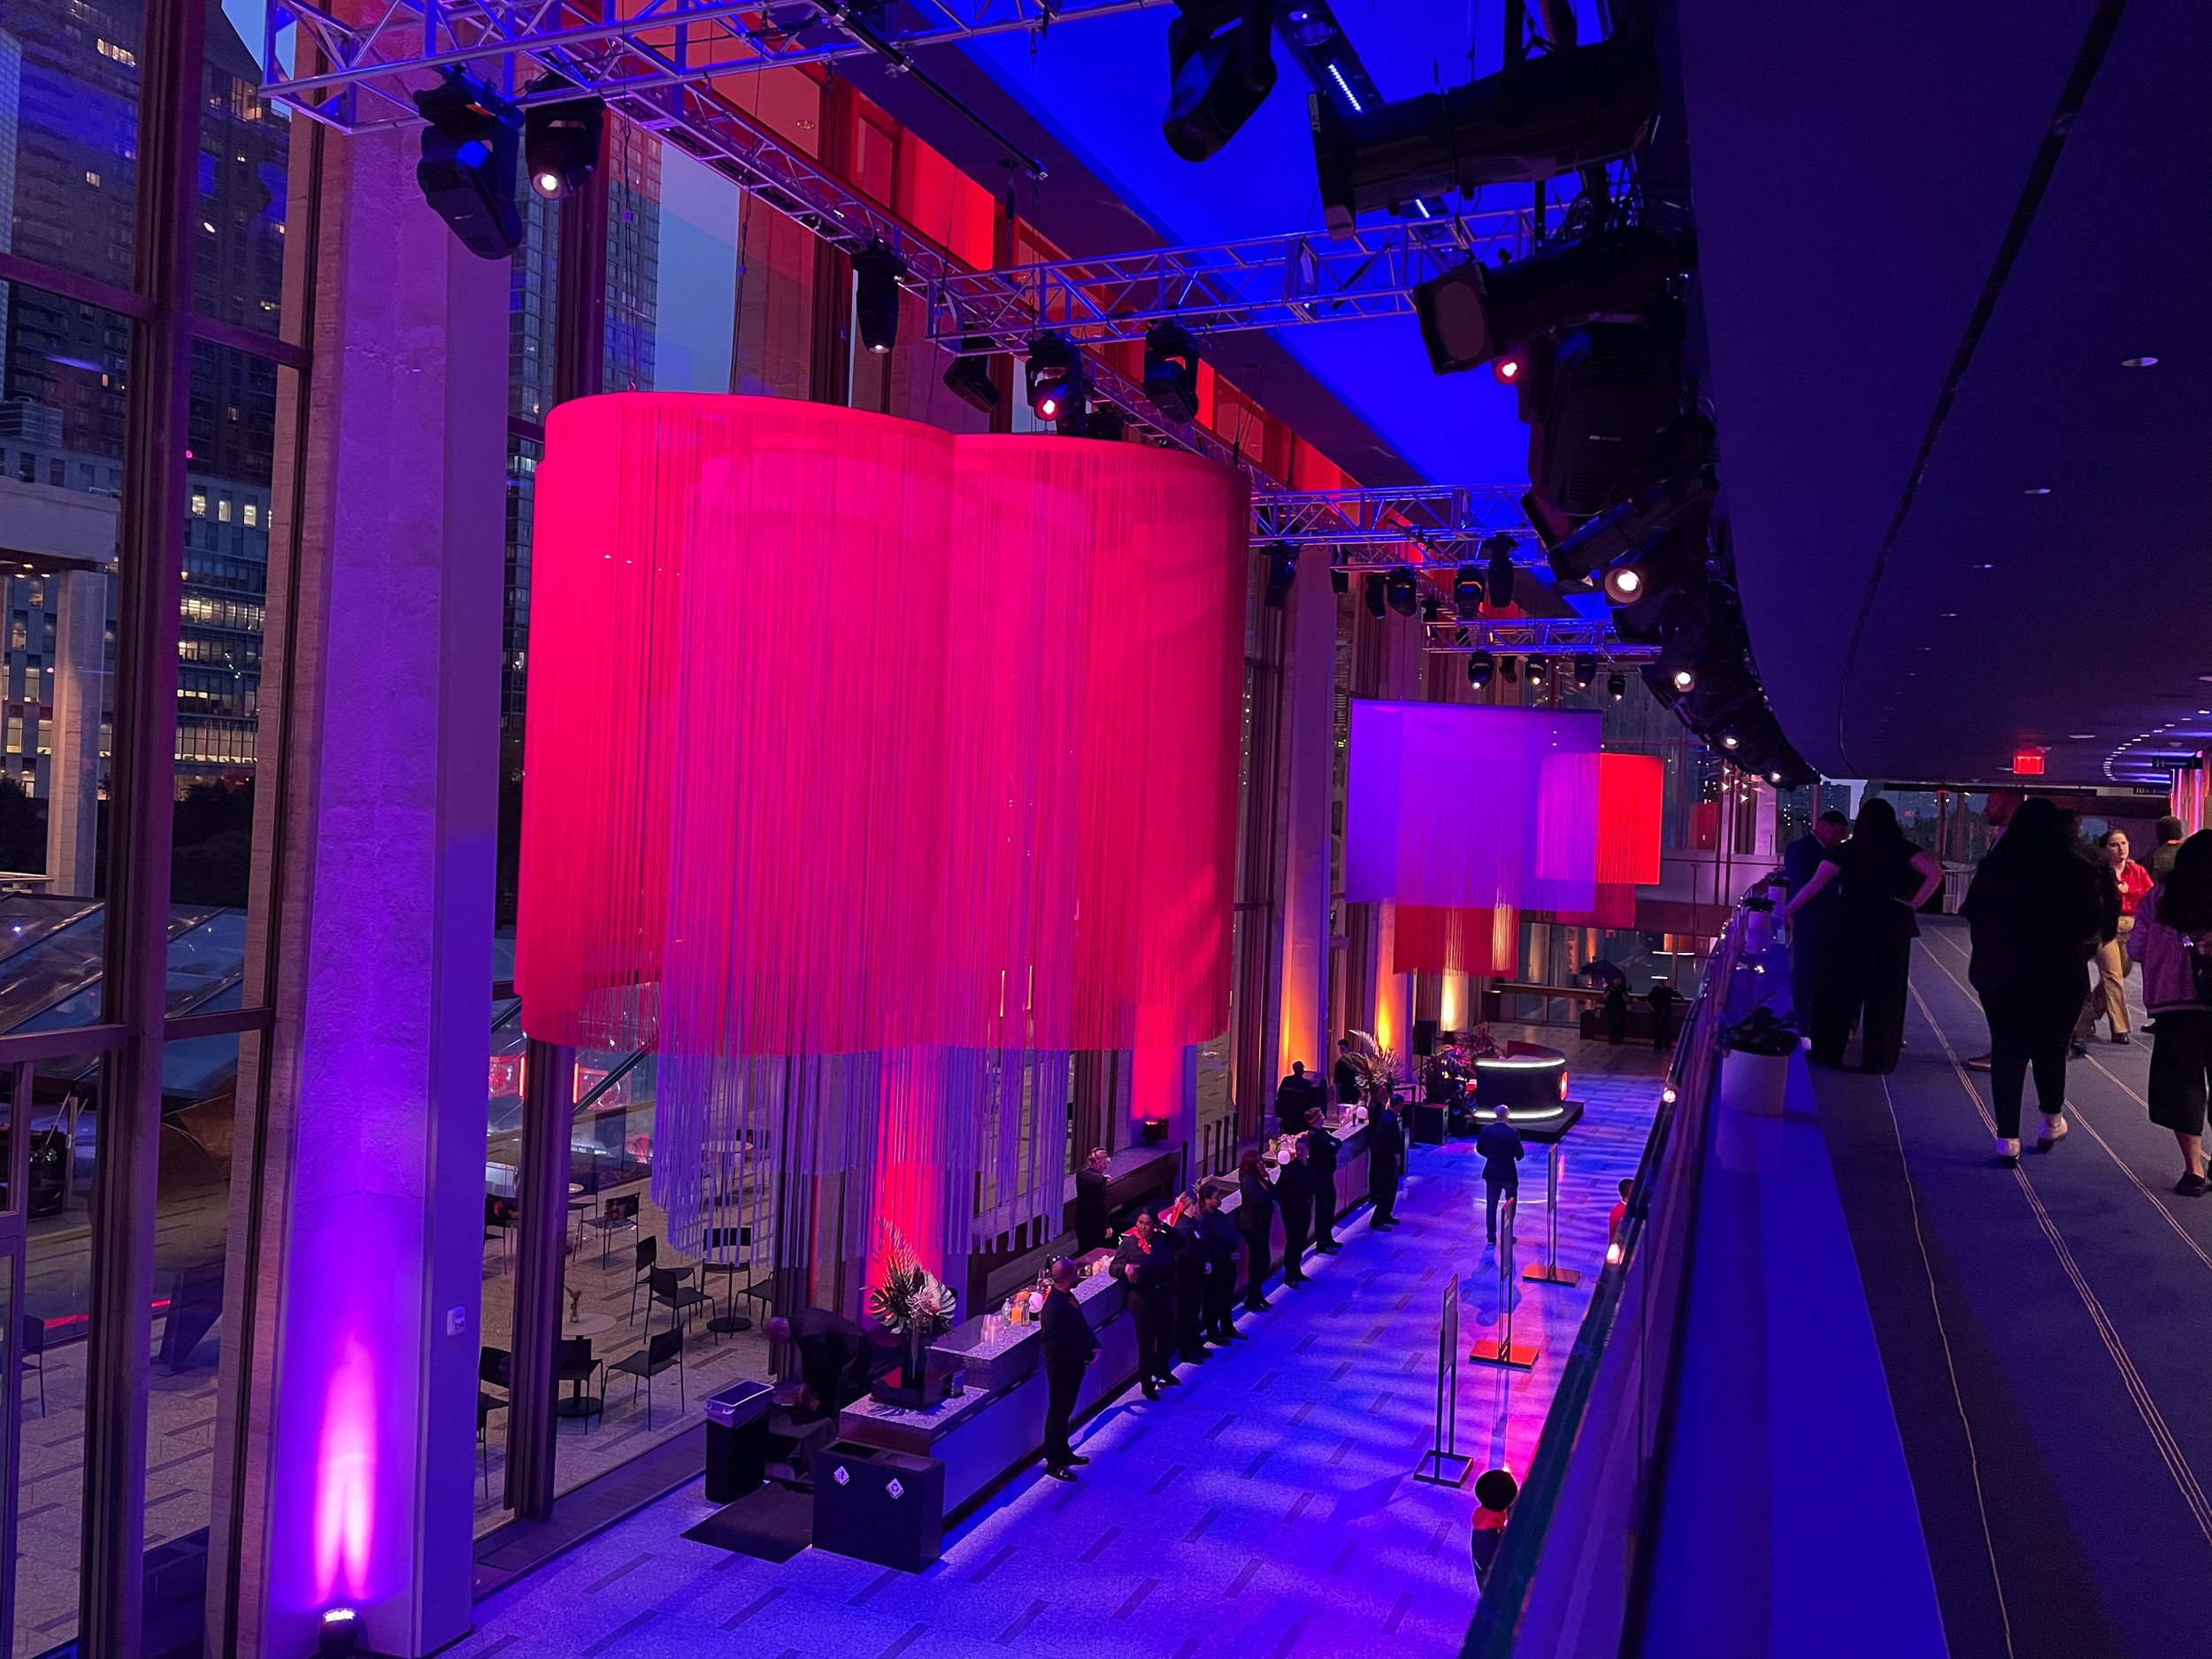  The captivating lighting design for the event accentuated Brandcast’s colorful visual ID and highlighted architectural and scenic details.  